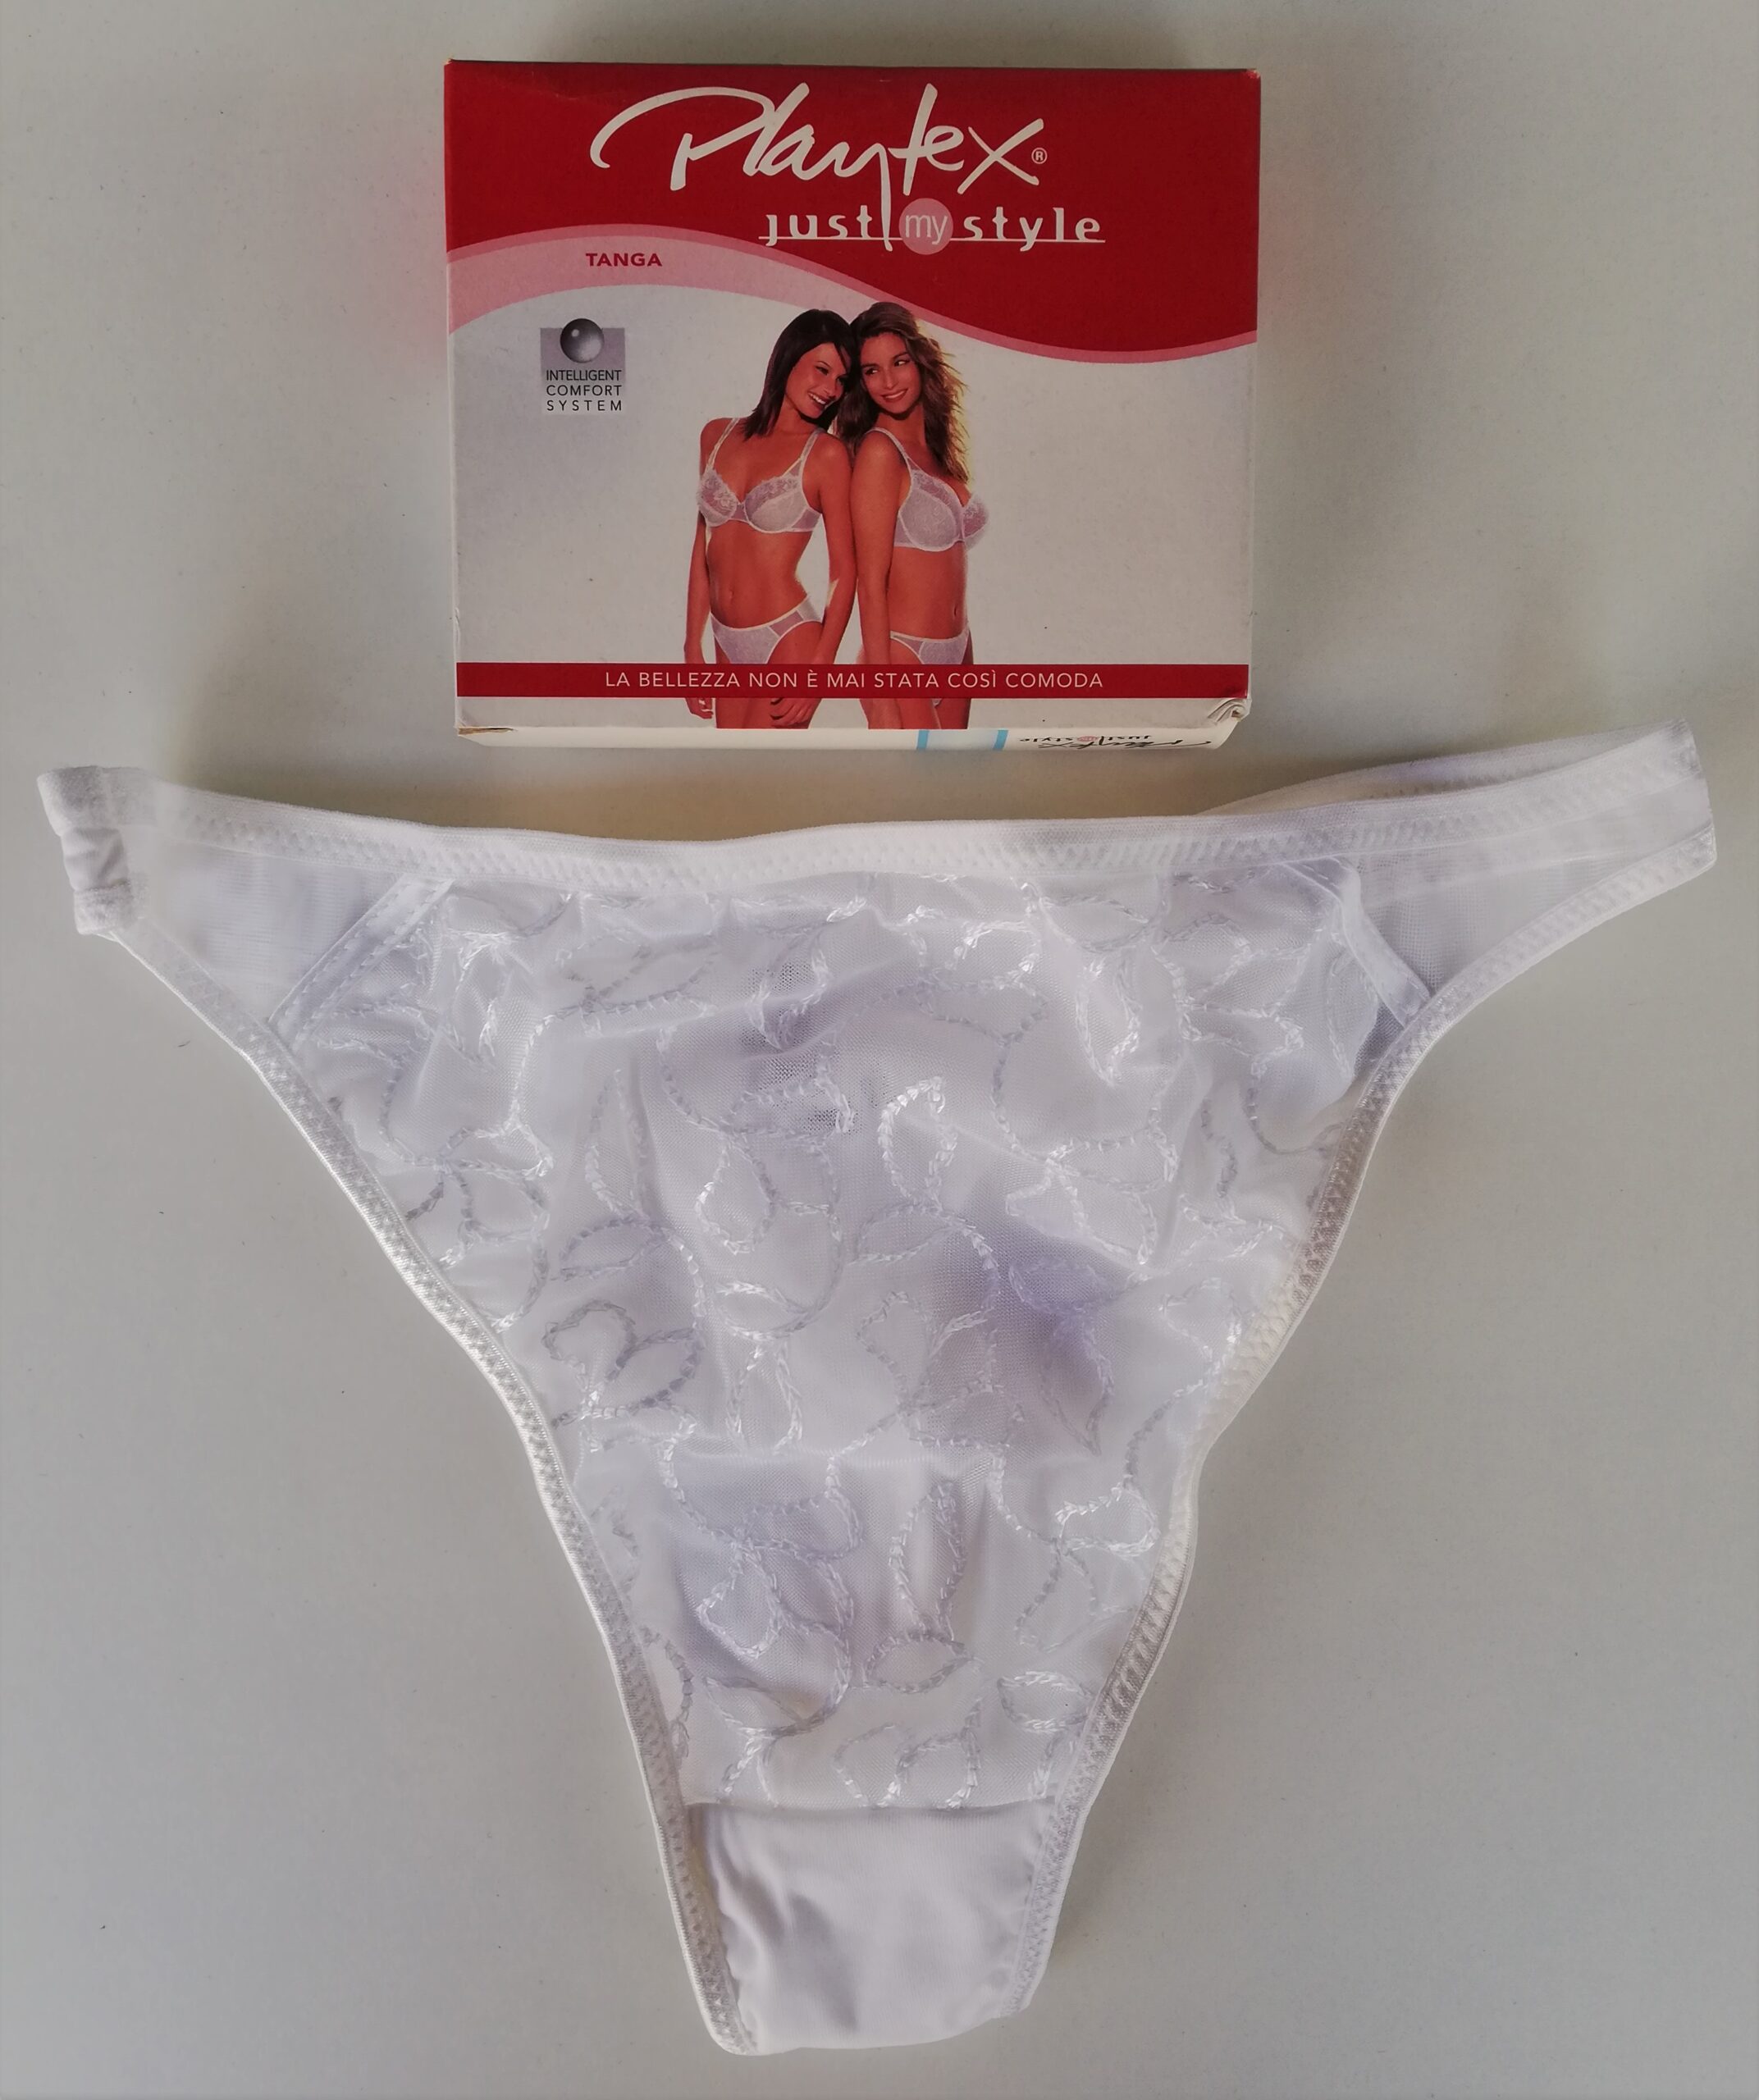 Playtex Archivi - Intimo by Muolo